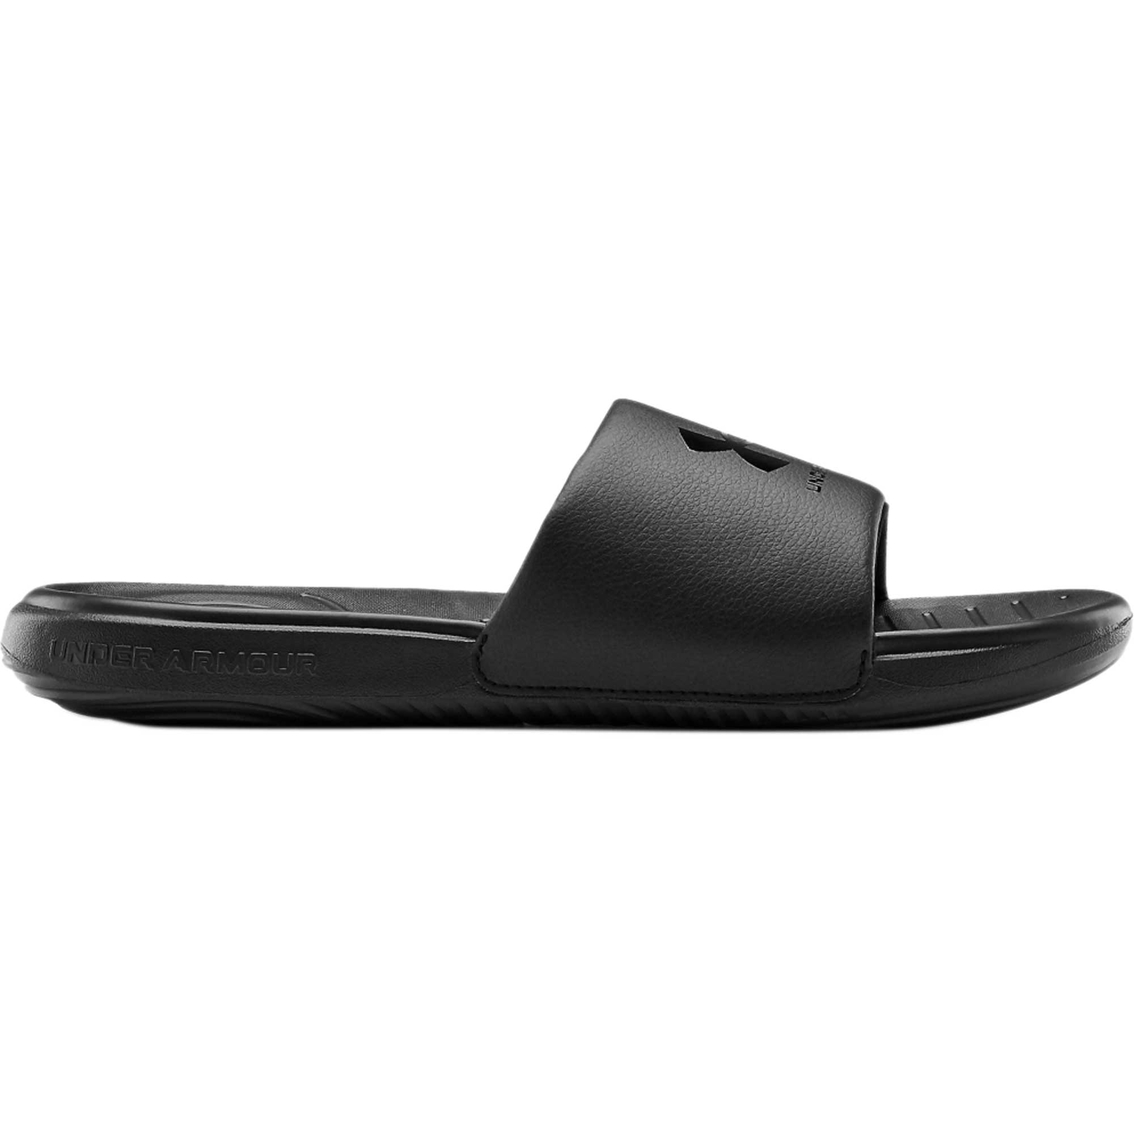 Under Armour Men's Ansa Fixed Slides - Image 2 of 5